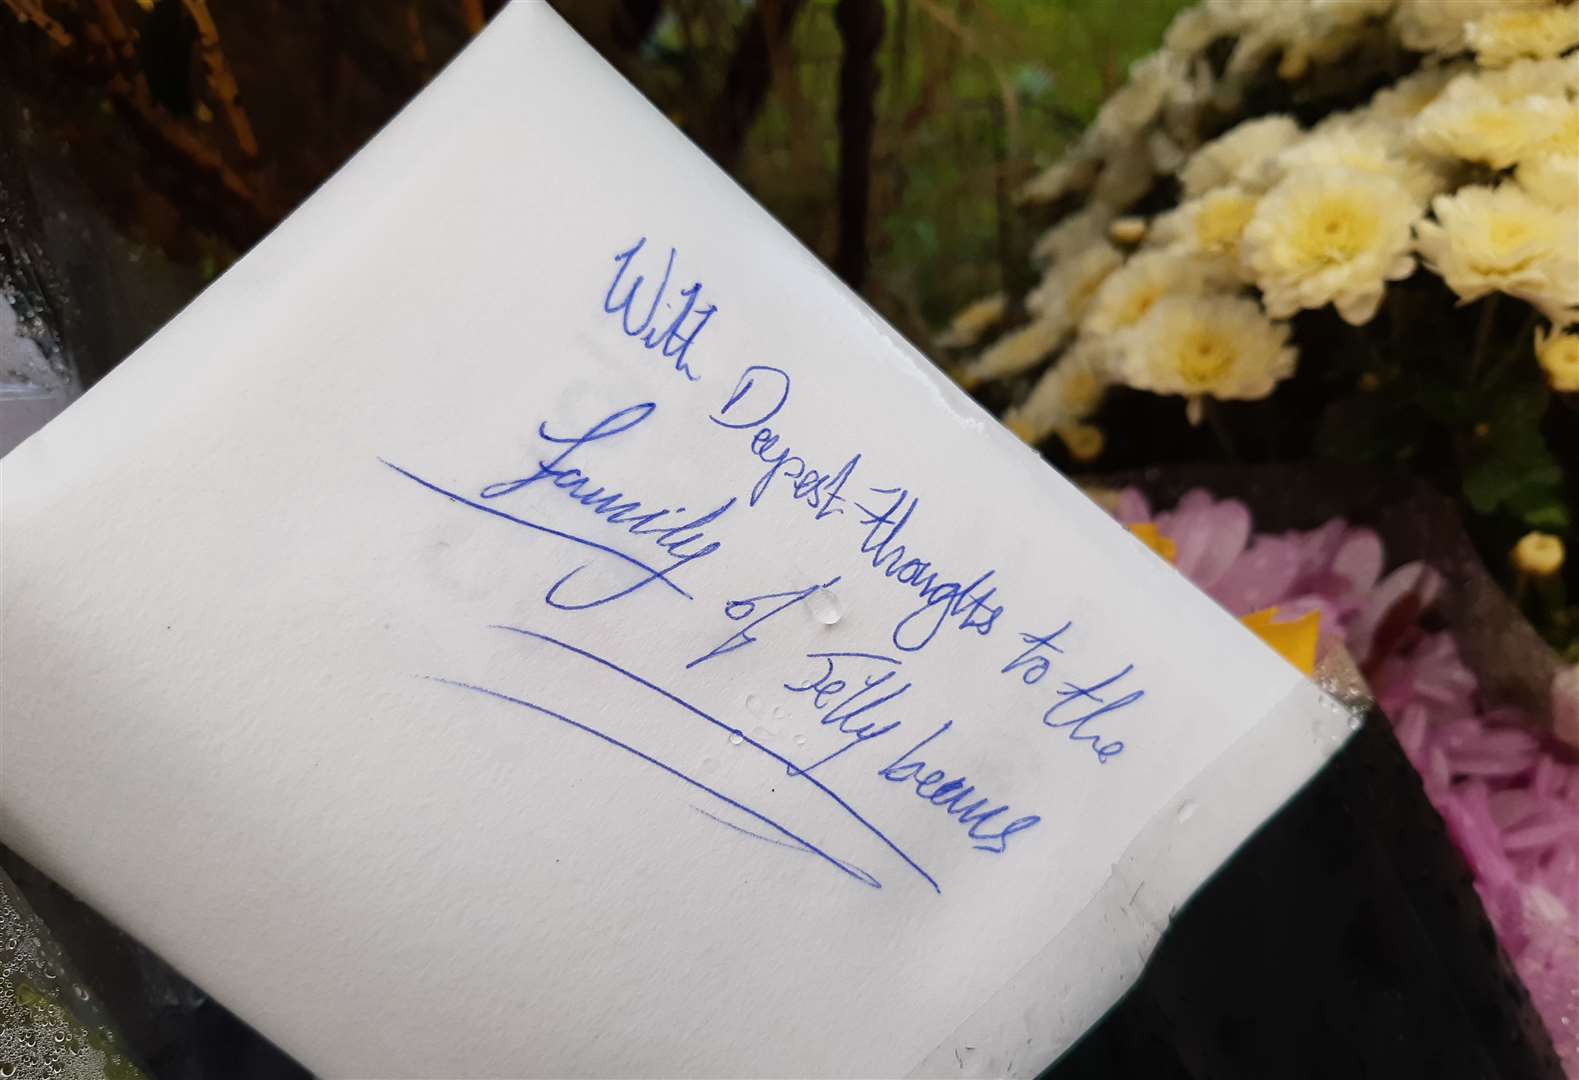 Floral tributes have been left after a child's death